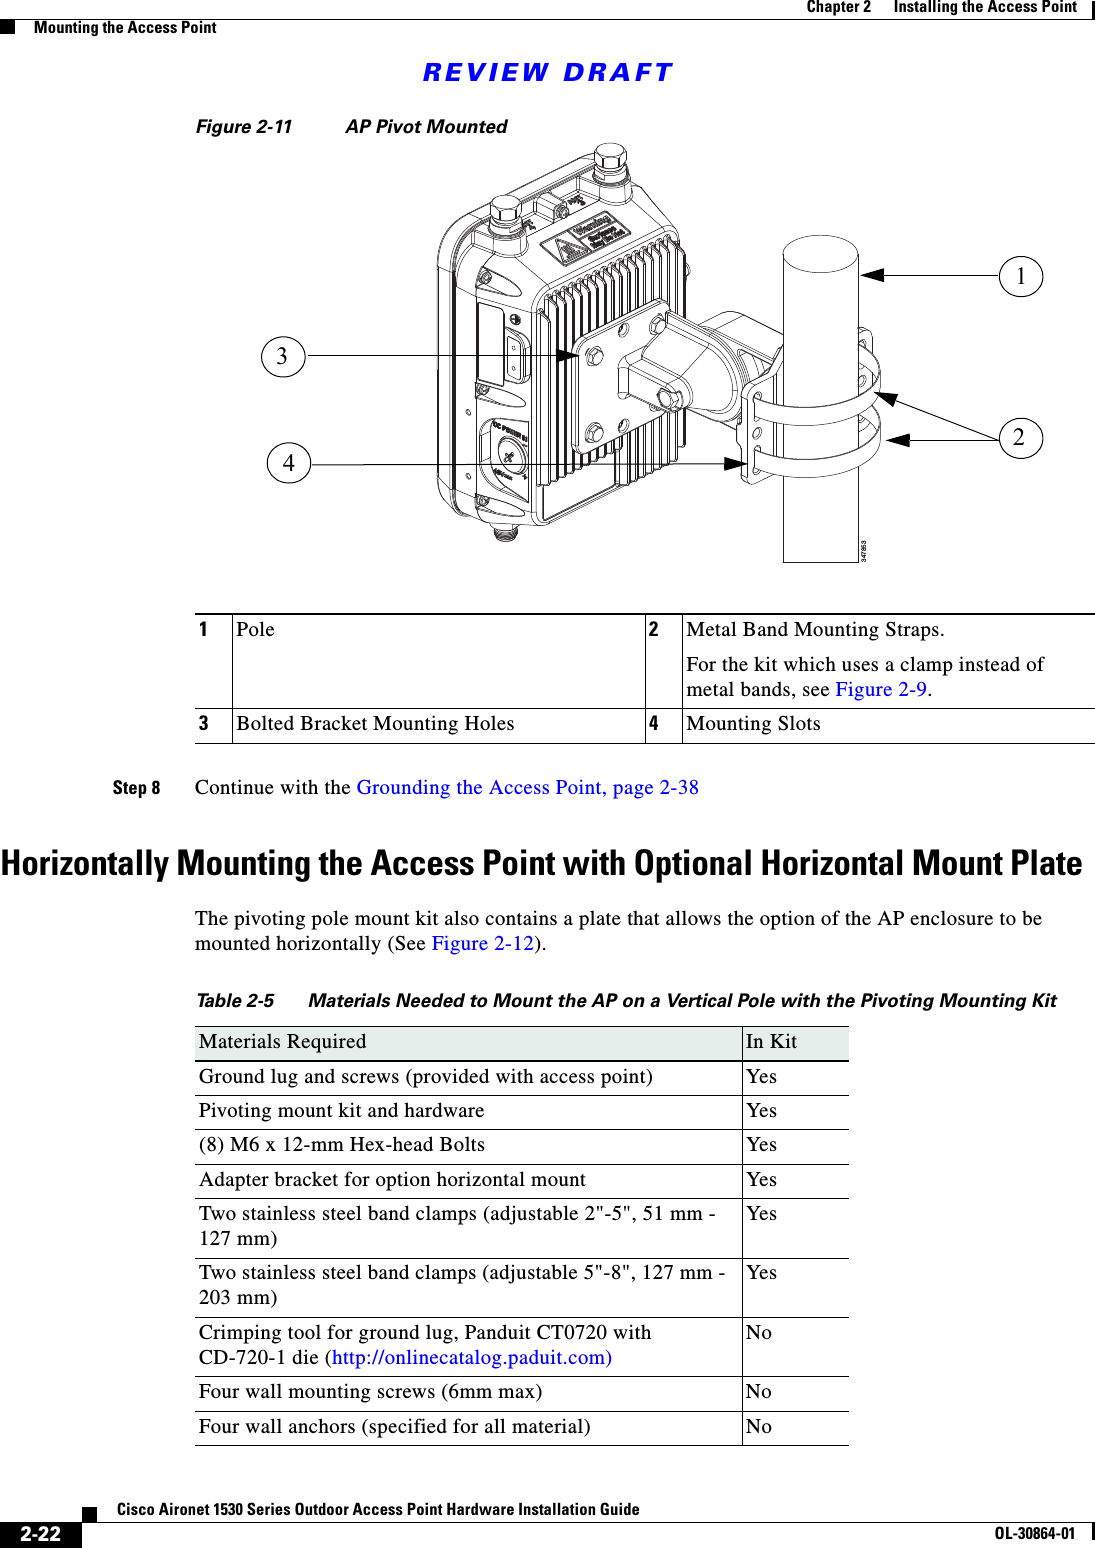 REVIEW DRAFT2-22Cisco Aironet 1530 Series Outdoor Access Point Hardware Installation GuideOL-30864-01Chapter 2      Installing the Access PointMounting the Access PointFigure 2-11 AP Pivot MountedStep 8 Continue with the Grounding the Access Point, page 2-38Horizontally Mounting the Access Point with Optional Horizontal Mount PlateThe pivoting pole mount kit also contains a plate that allows the option of the AP enclosure to be mounted horizontally (See Figure 2-12).Table 2-5 Materials Needed to Mount the AP on a Vertical Pole with the Pivoting Mounting Kit1Pole 2Metal Band Mounting Straps.For the kit which uses a clamp instead of metal bands, see Figure 2-9.3Bolted Bracket Mounting Holes 4Mounting Slots3478531234Materials Required In KitGround lug and screws (provided with access point) YesPivoting mount kit and hardware Yes(8) M6 x 12-mm Hex-head Bolts YesAdapter bracket for option horizontal mount YesTwo stainless steel band clamps (adjustable 2&quot;-5&quot;, 51 mm - 127 mm)YesTwo stainless steel band clamps (adjustable 5&quot;-8&quot;, 127 mm - 203 mm)YesCrimping tool for ground lug, Panduit CT0720 with CD-720-1 die (http://onlinecatalog.paduit.com)NoFour wall mounting screws (6mm max) NoFour wall anchors (specified for all material) No